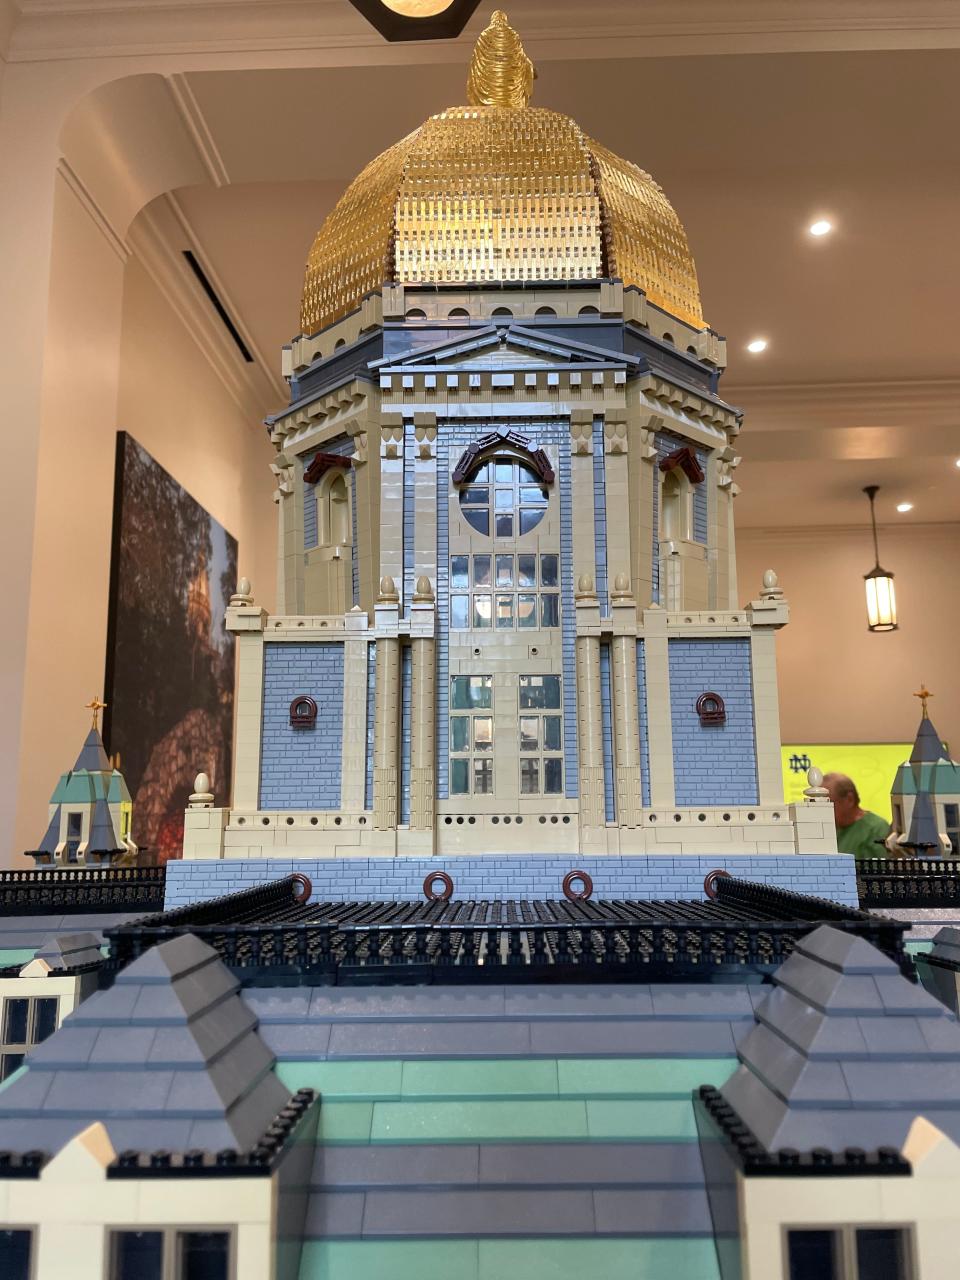 This photo shows the backside of the University of Notre Dame's Golden Dome made of gold Lego bricks on a replica of the Administration Building made of 300,000 Lego bricks now on display on campus in McKenna Hall.